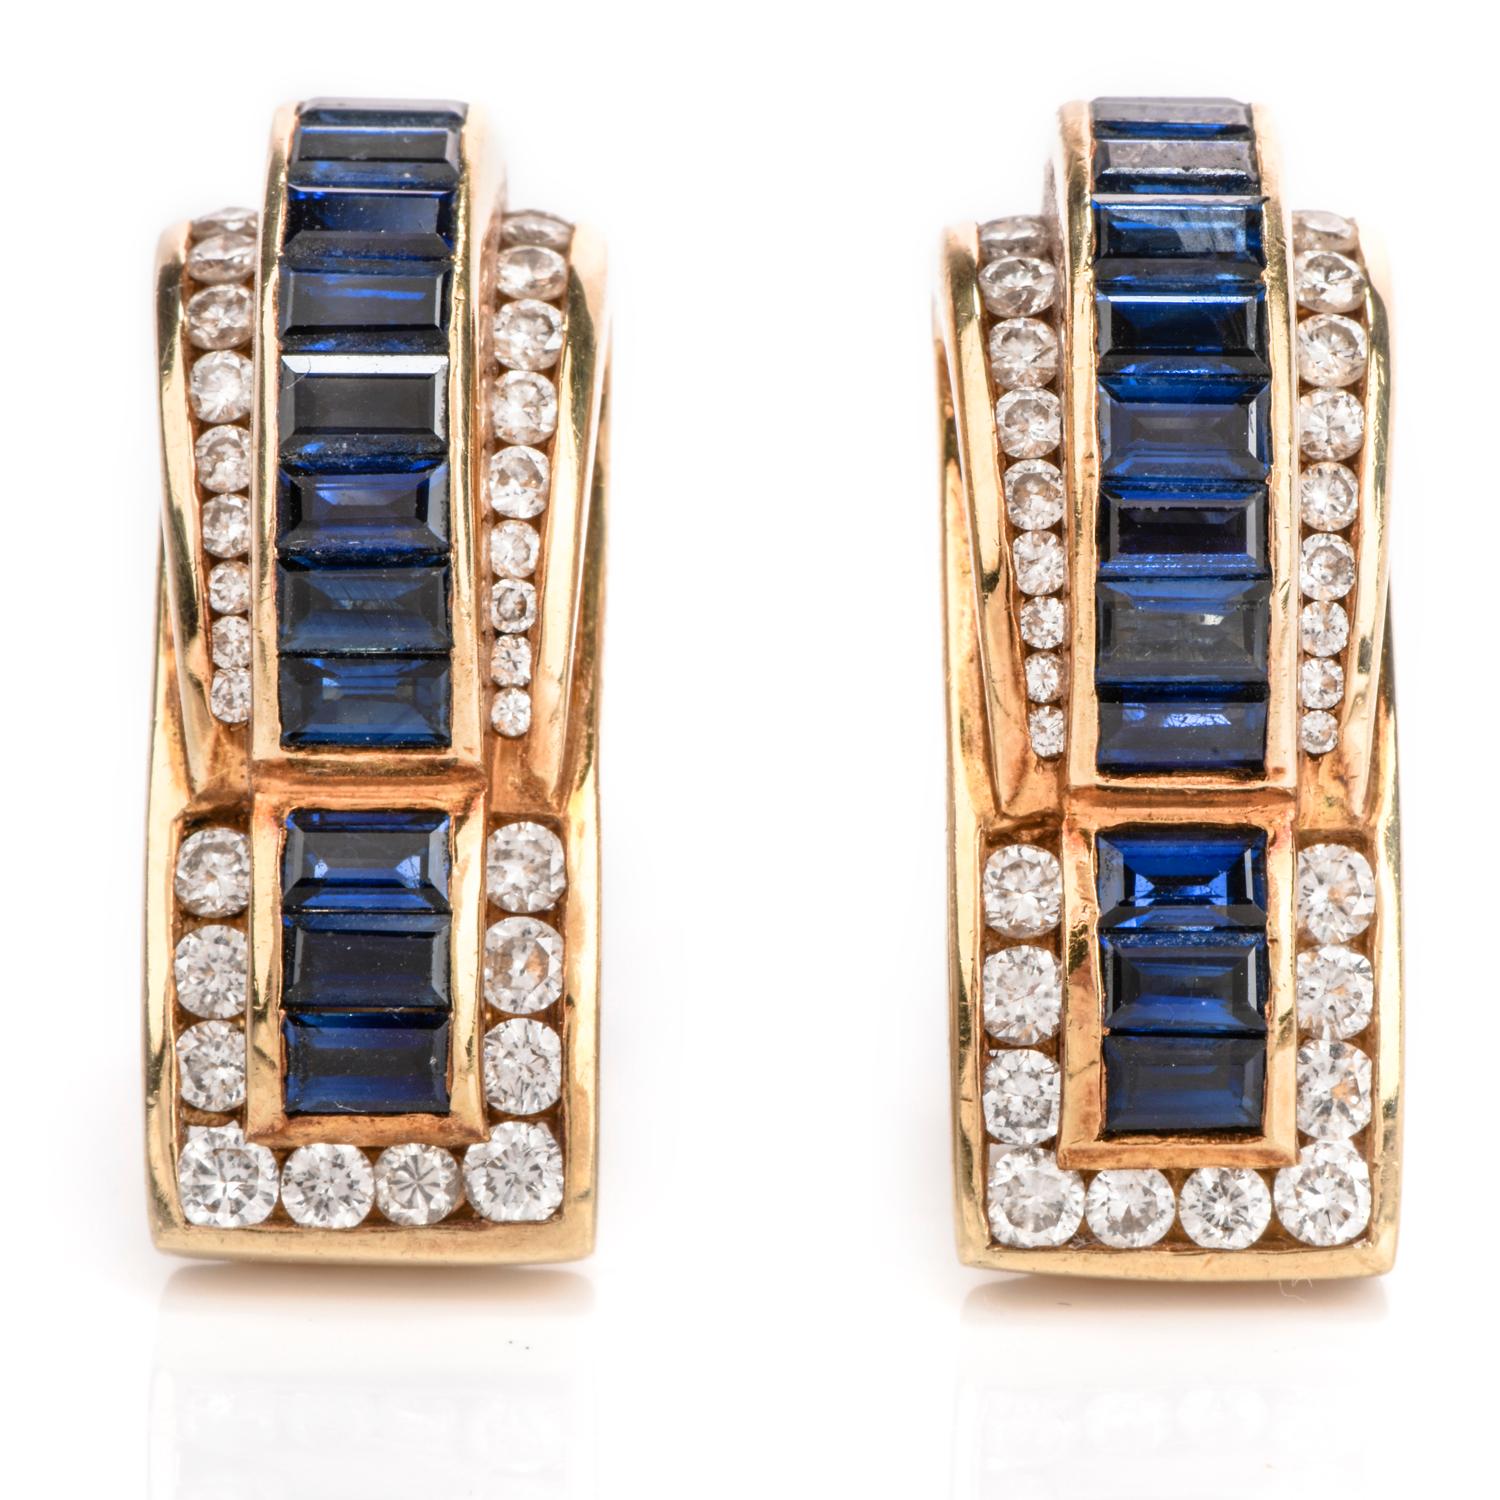 1980's  vintage Elegant Designer Charles Krypell diamond and sapphire earrings for pierced ears crafted in 18K yellow gold.

Material: 18K yellow gold

Weight: 24.9 grams

Dimensions: 25mm x 10mm

Diamonds: 64 round cut Diamonds approx: 1.40cttw,